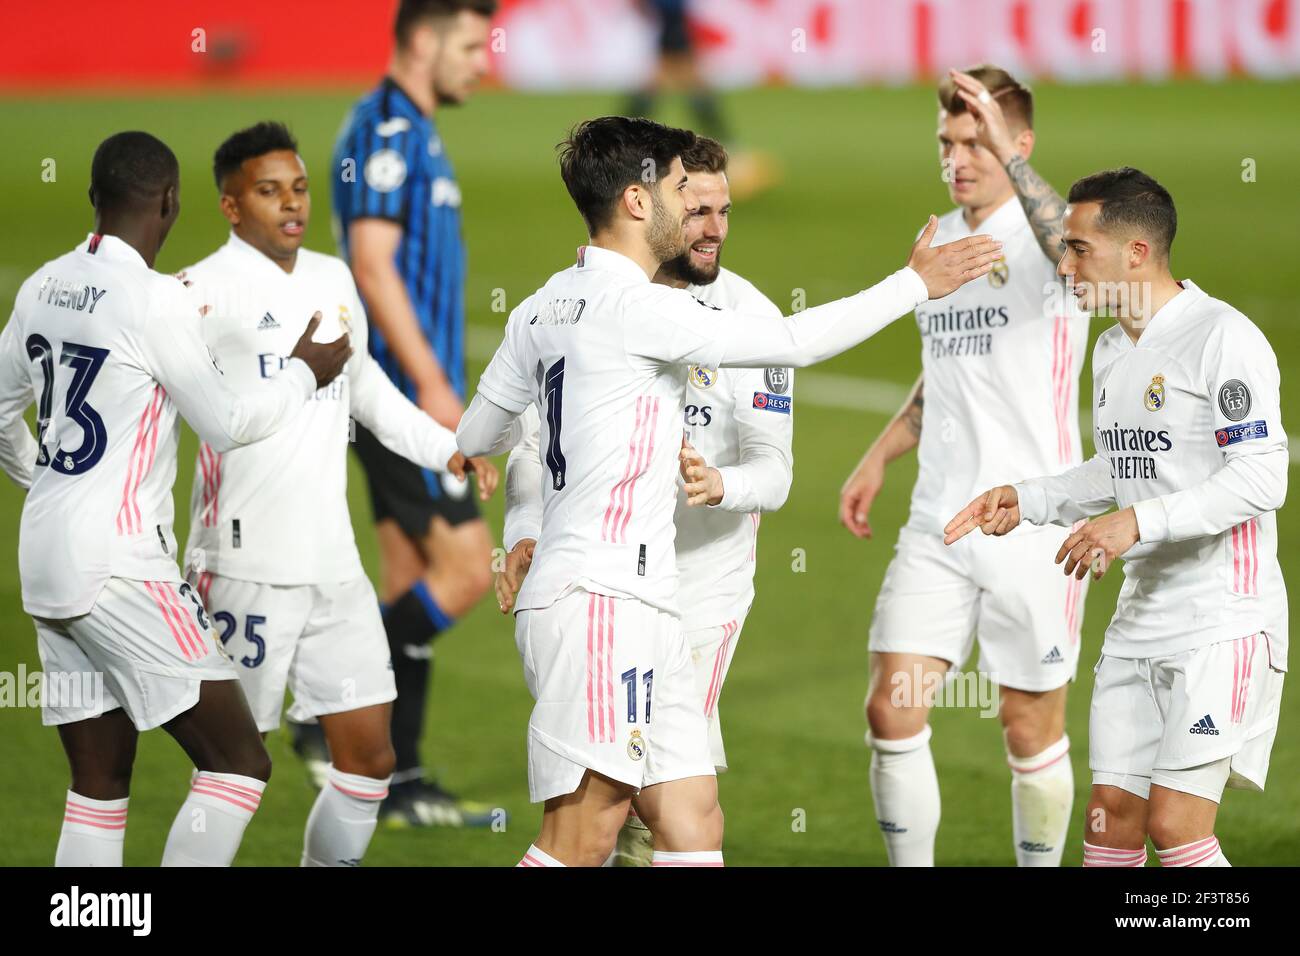 Madrid, Spain. 16th Mar, 2020. Real Madrid team group (Real)  Football/Soccer : Real Madrid team group celebrate after Asensio's goal  during UEFA Champions League Round of 16 2nd leg match between Real